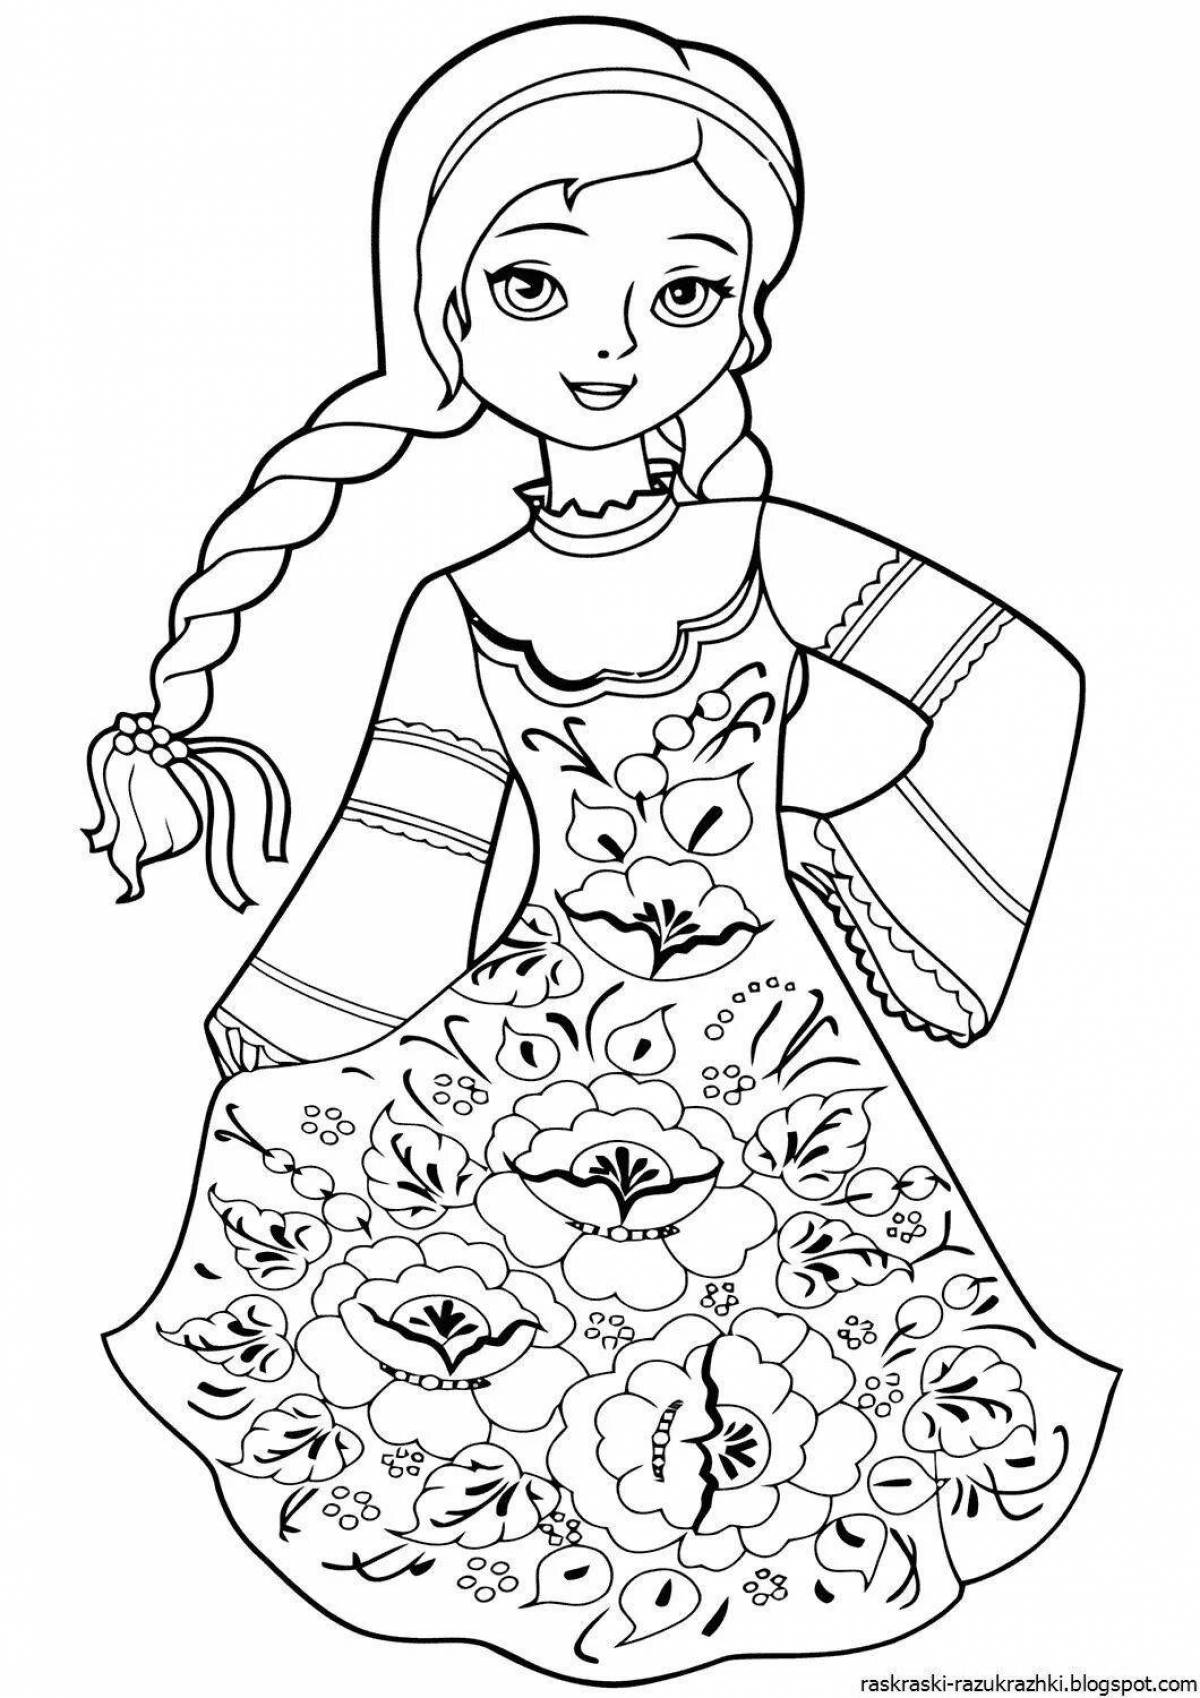 Amazing Russian girl coloring book